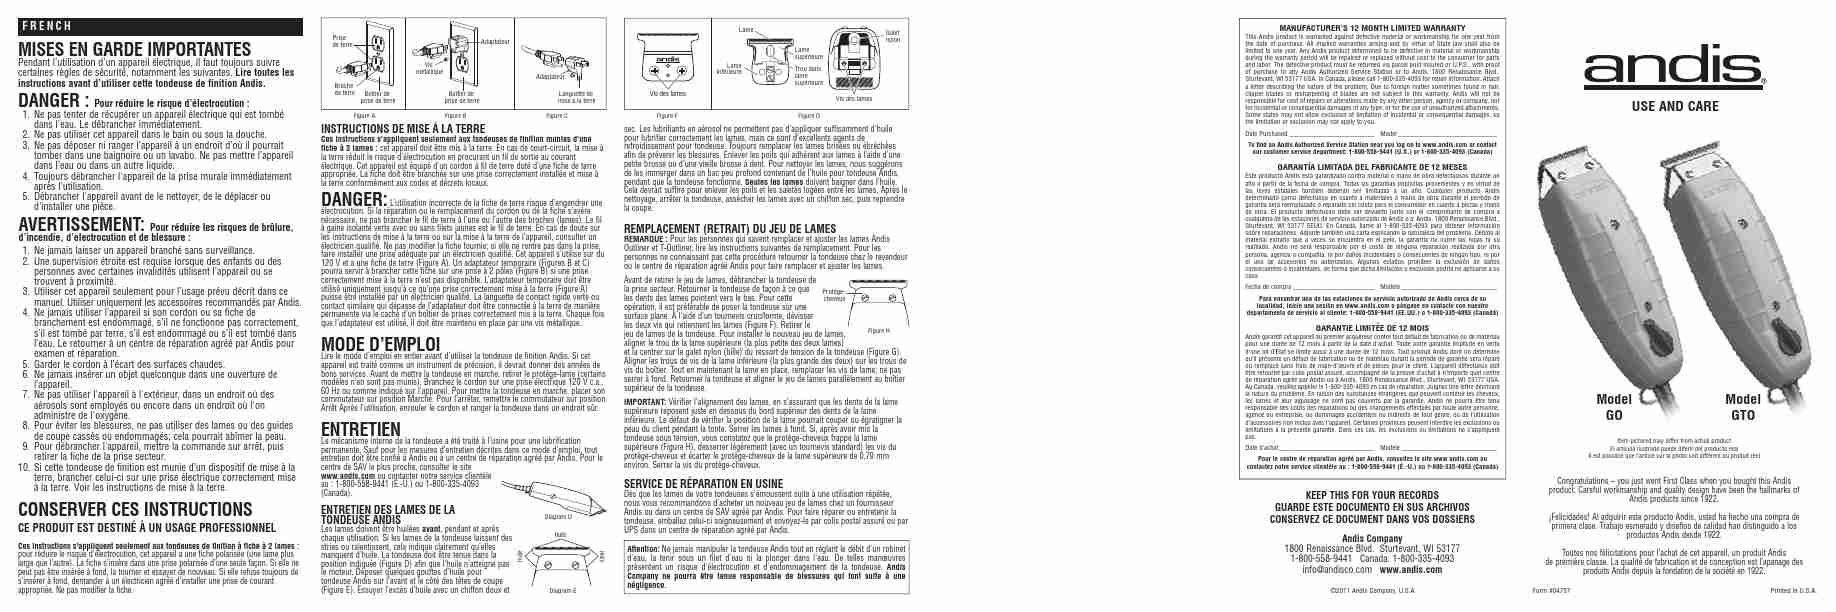 Andis Company Electric Shaver GO-page_pdf